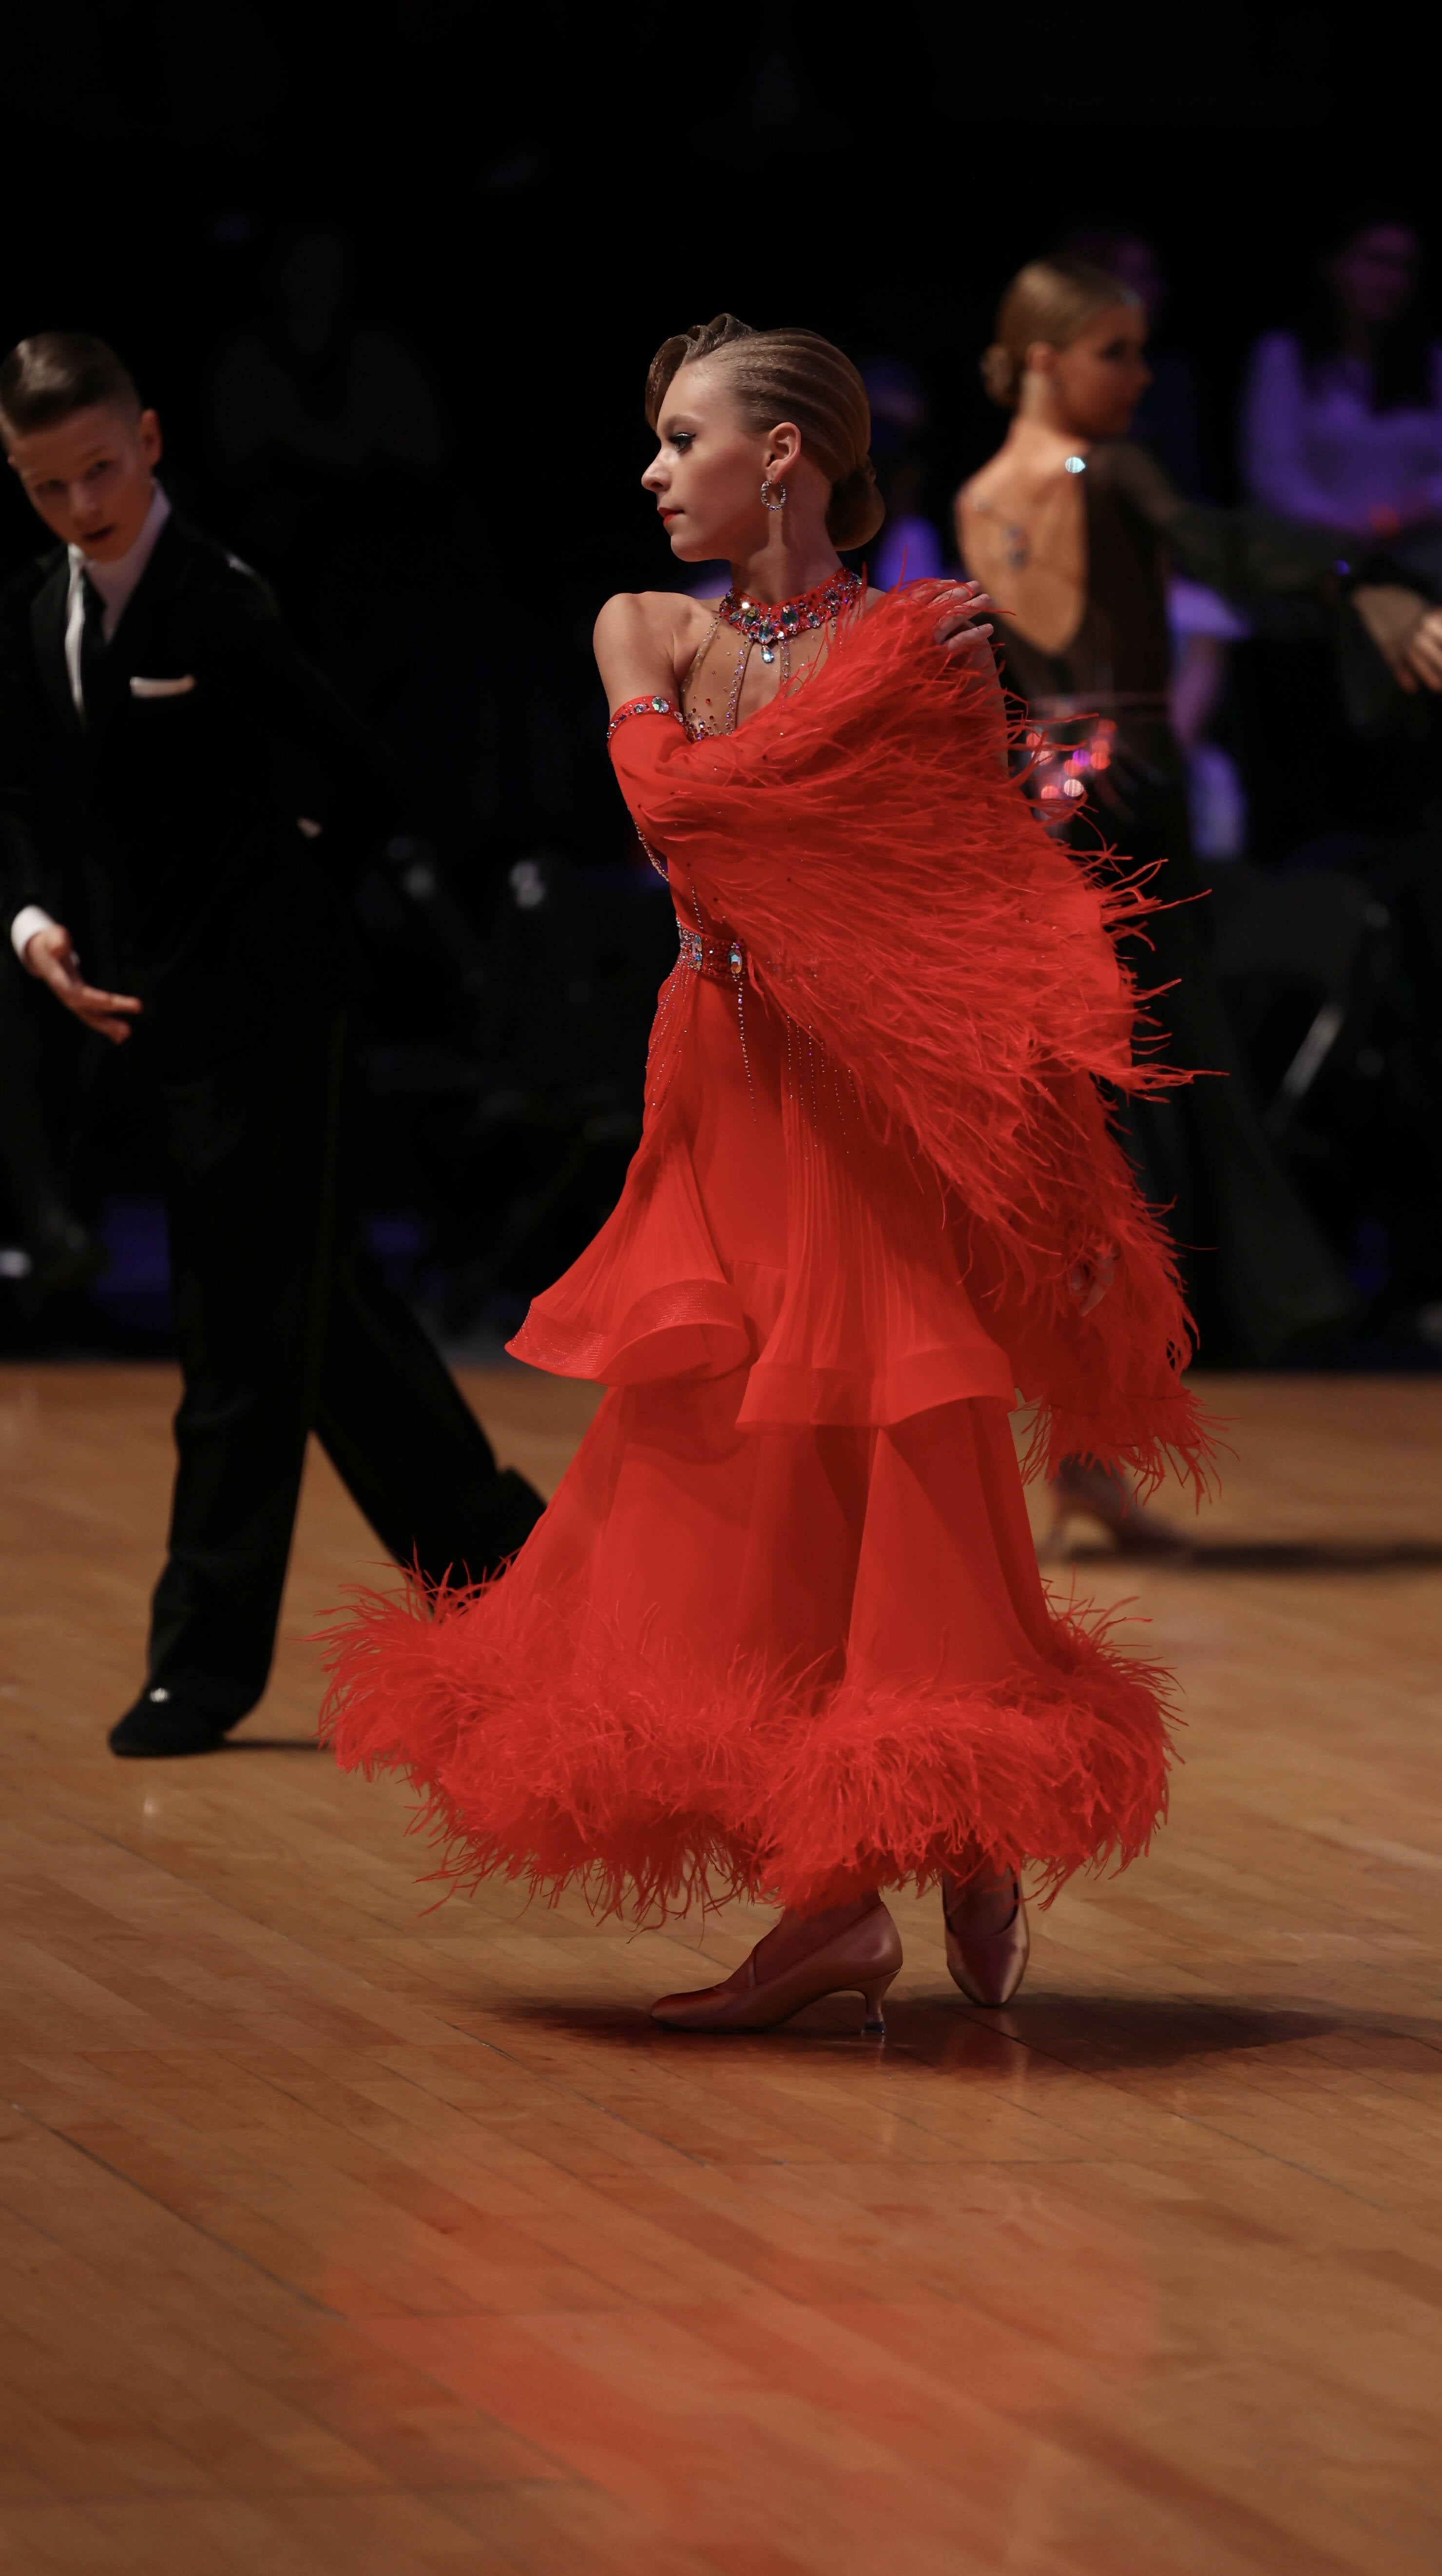 Flame Feathered Dress